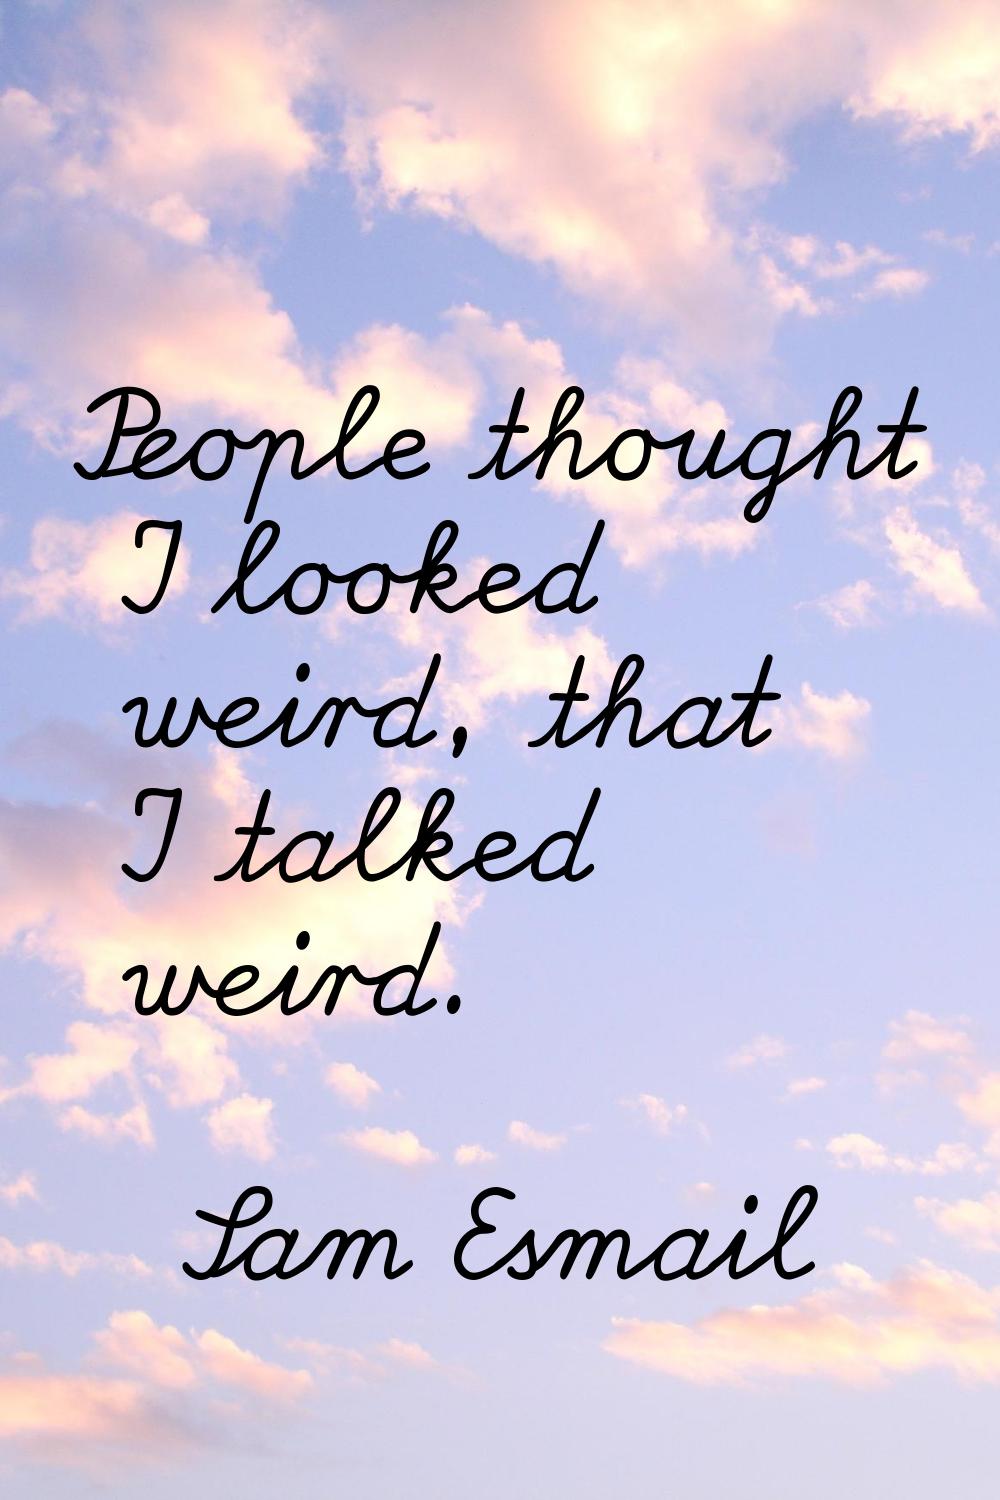 People thought I looked weird, that I talked weird.